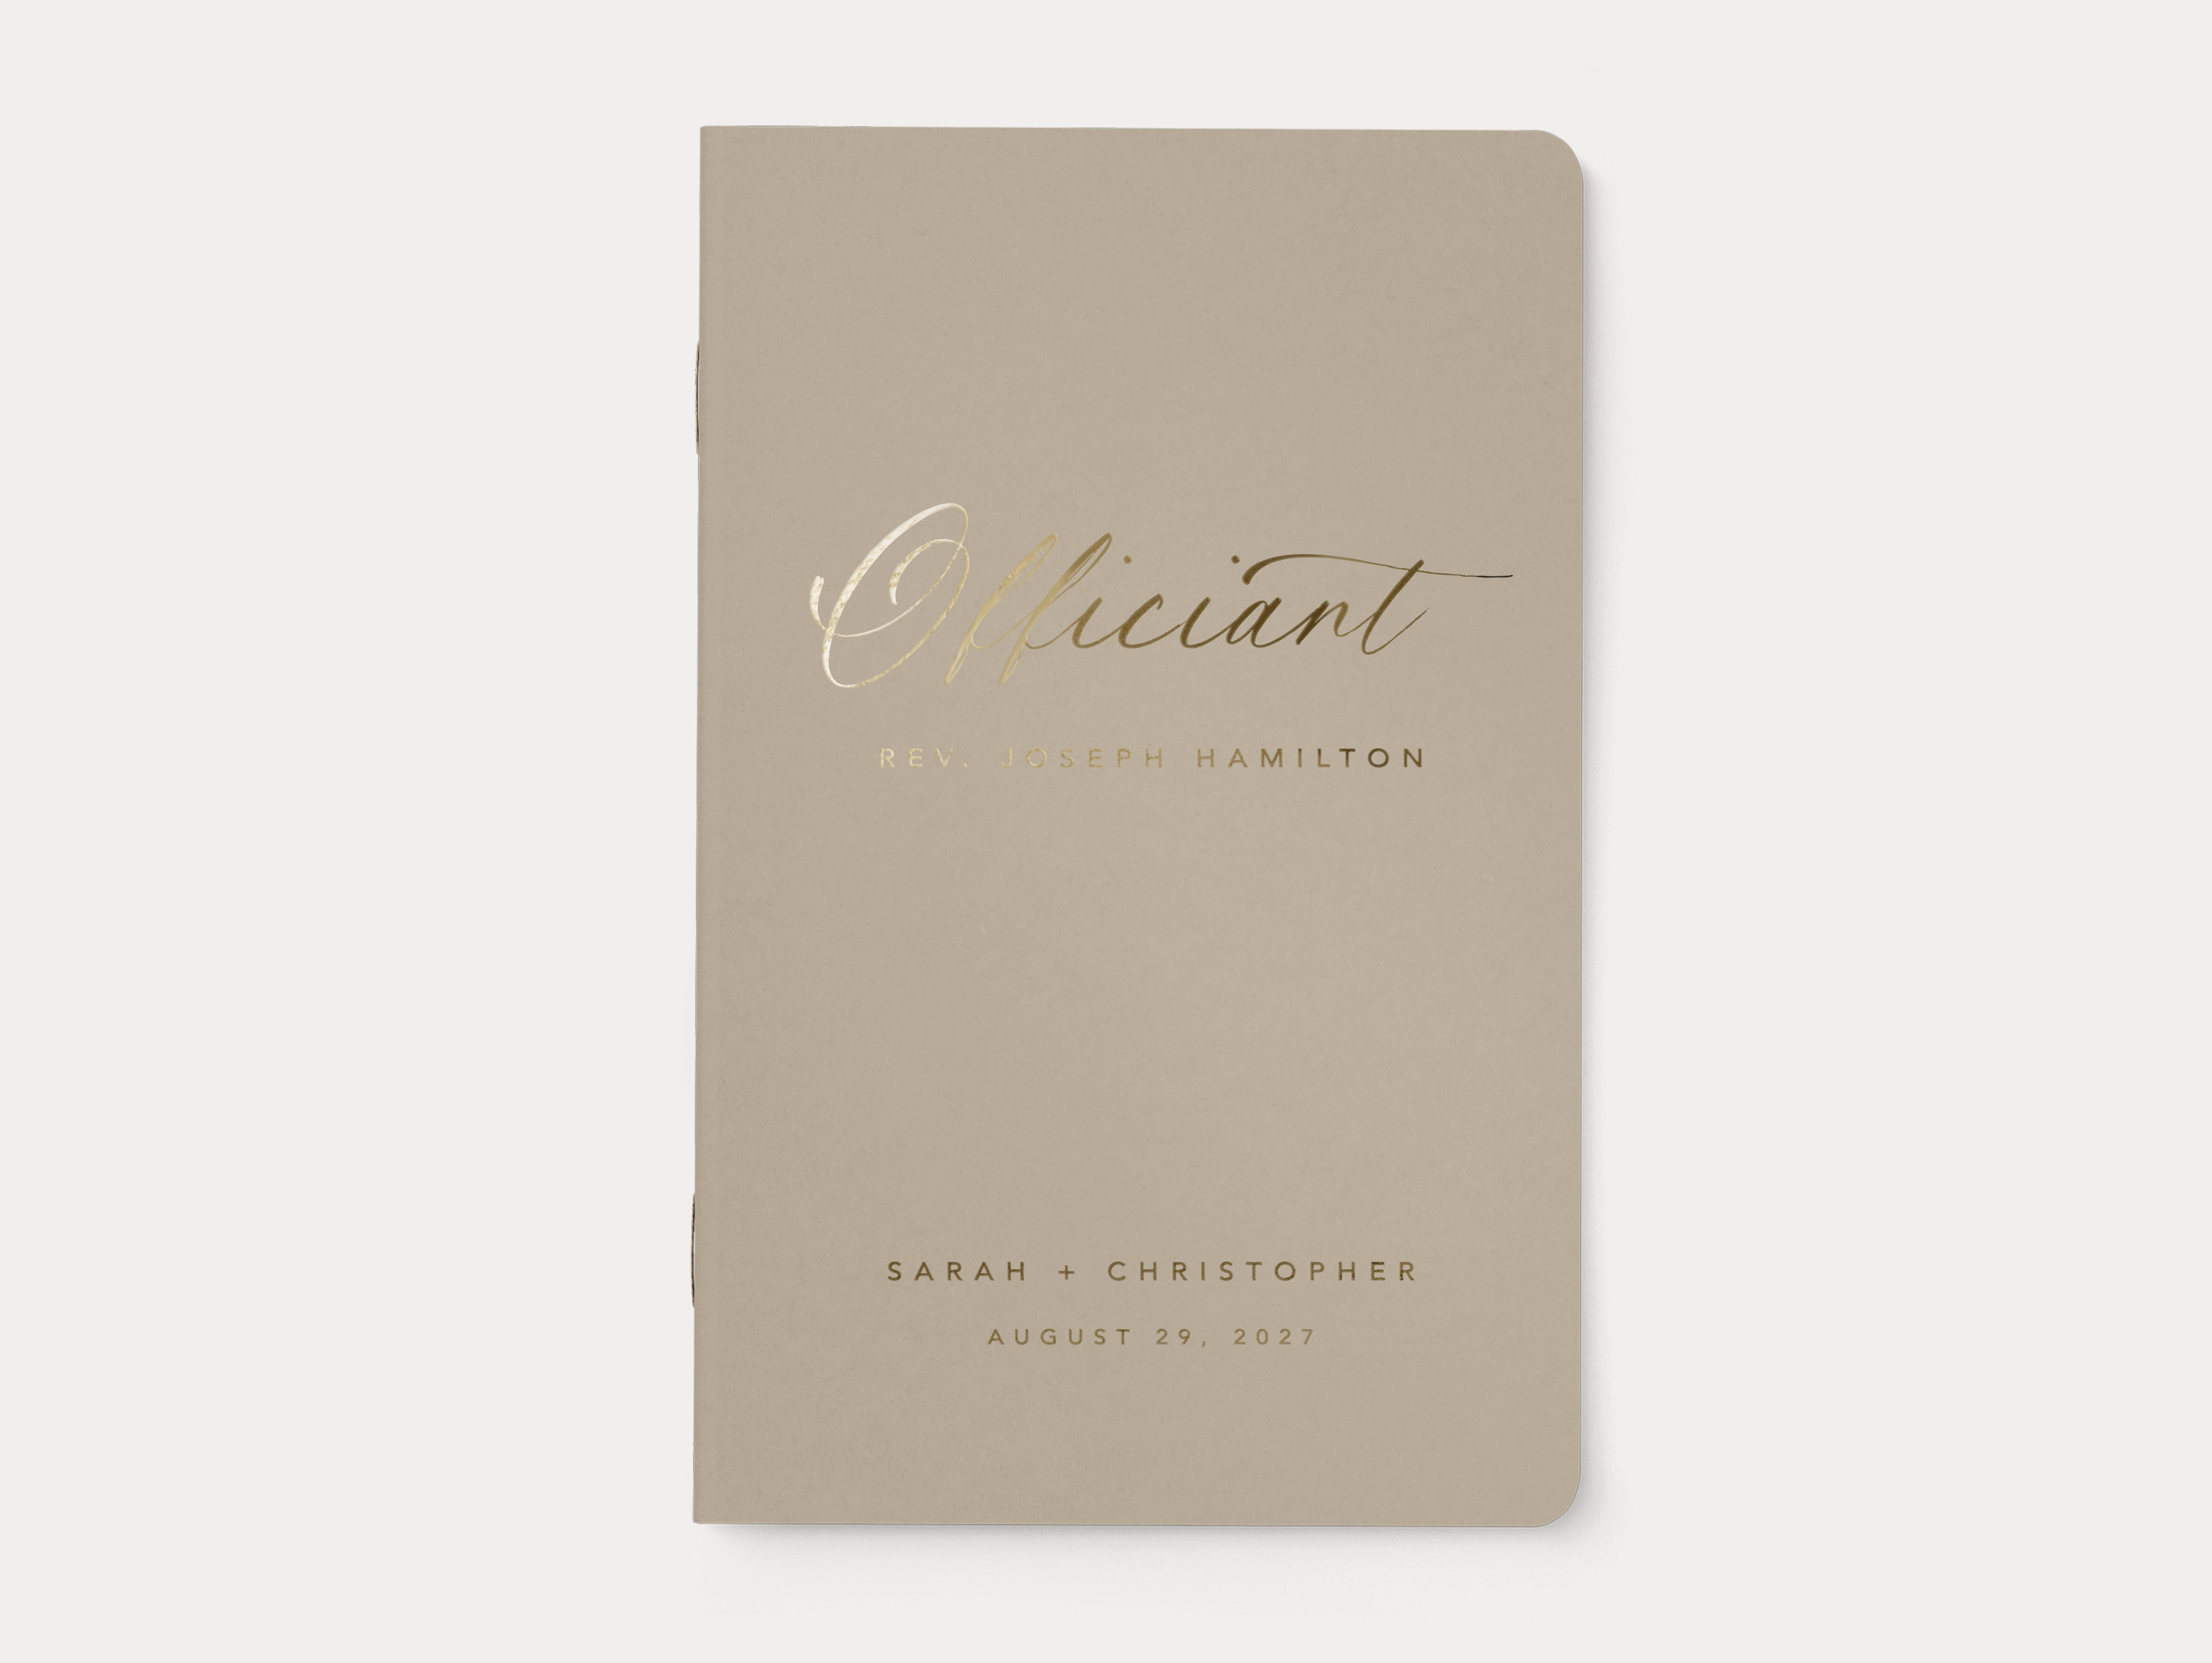 Personalized officiant cermony book with gold foil.